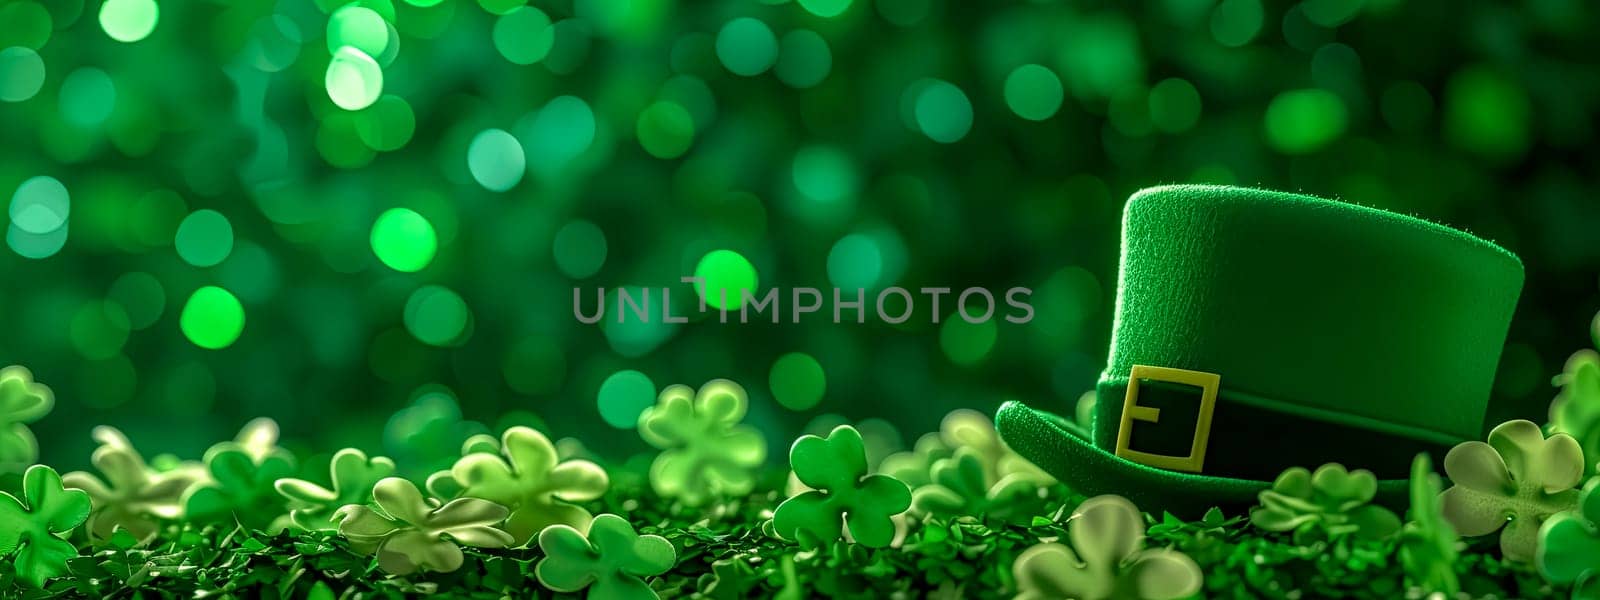 A terrestrial plant, the green leprechaun hat rests amidst a cluster of green shamrocks, creating a picturesque natural landscape.